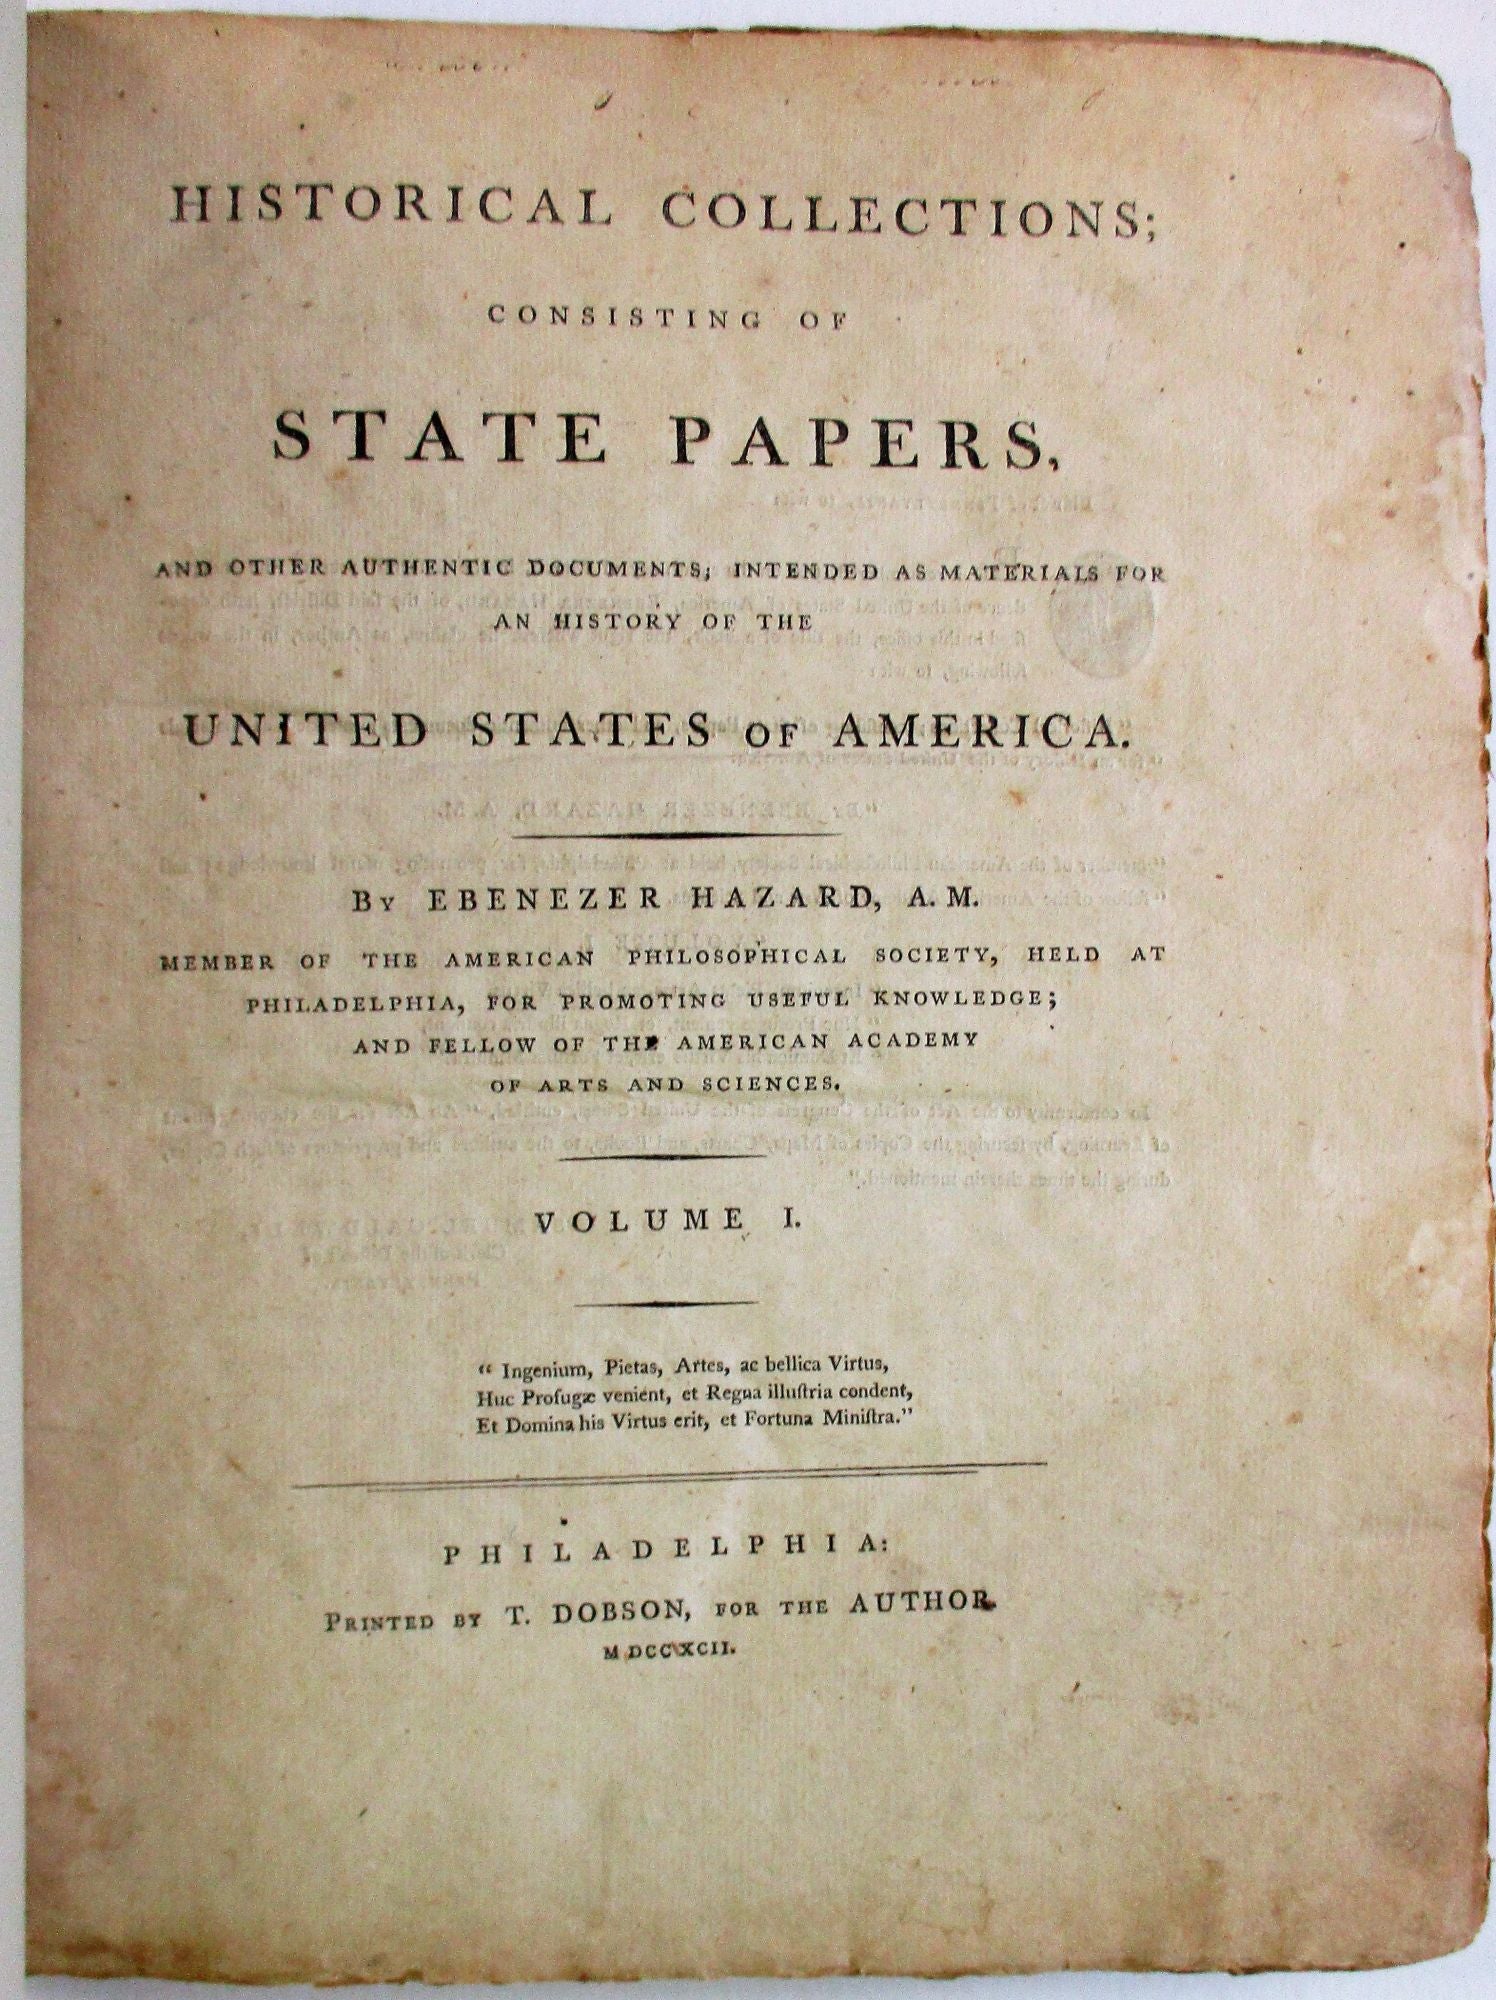 United States Digitized Collections — Early American Sources